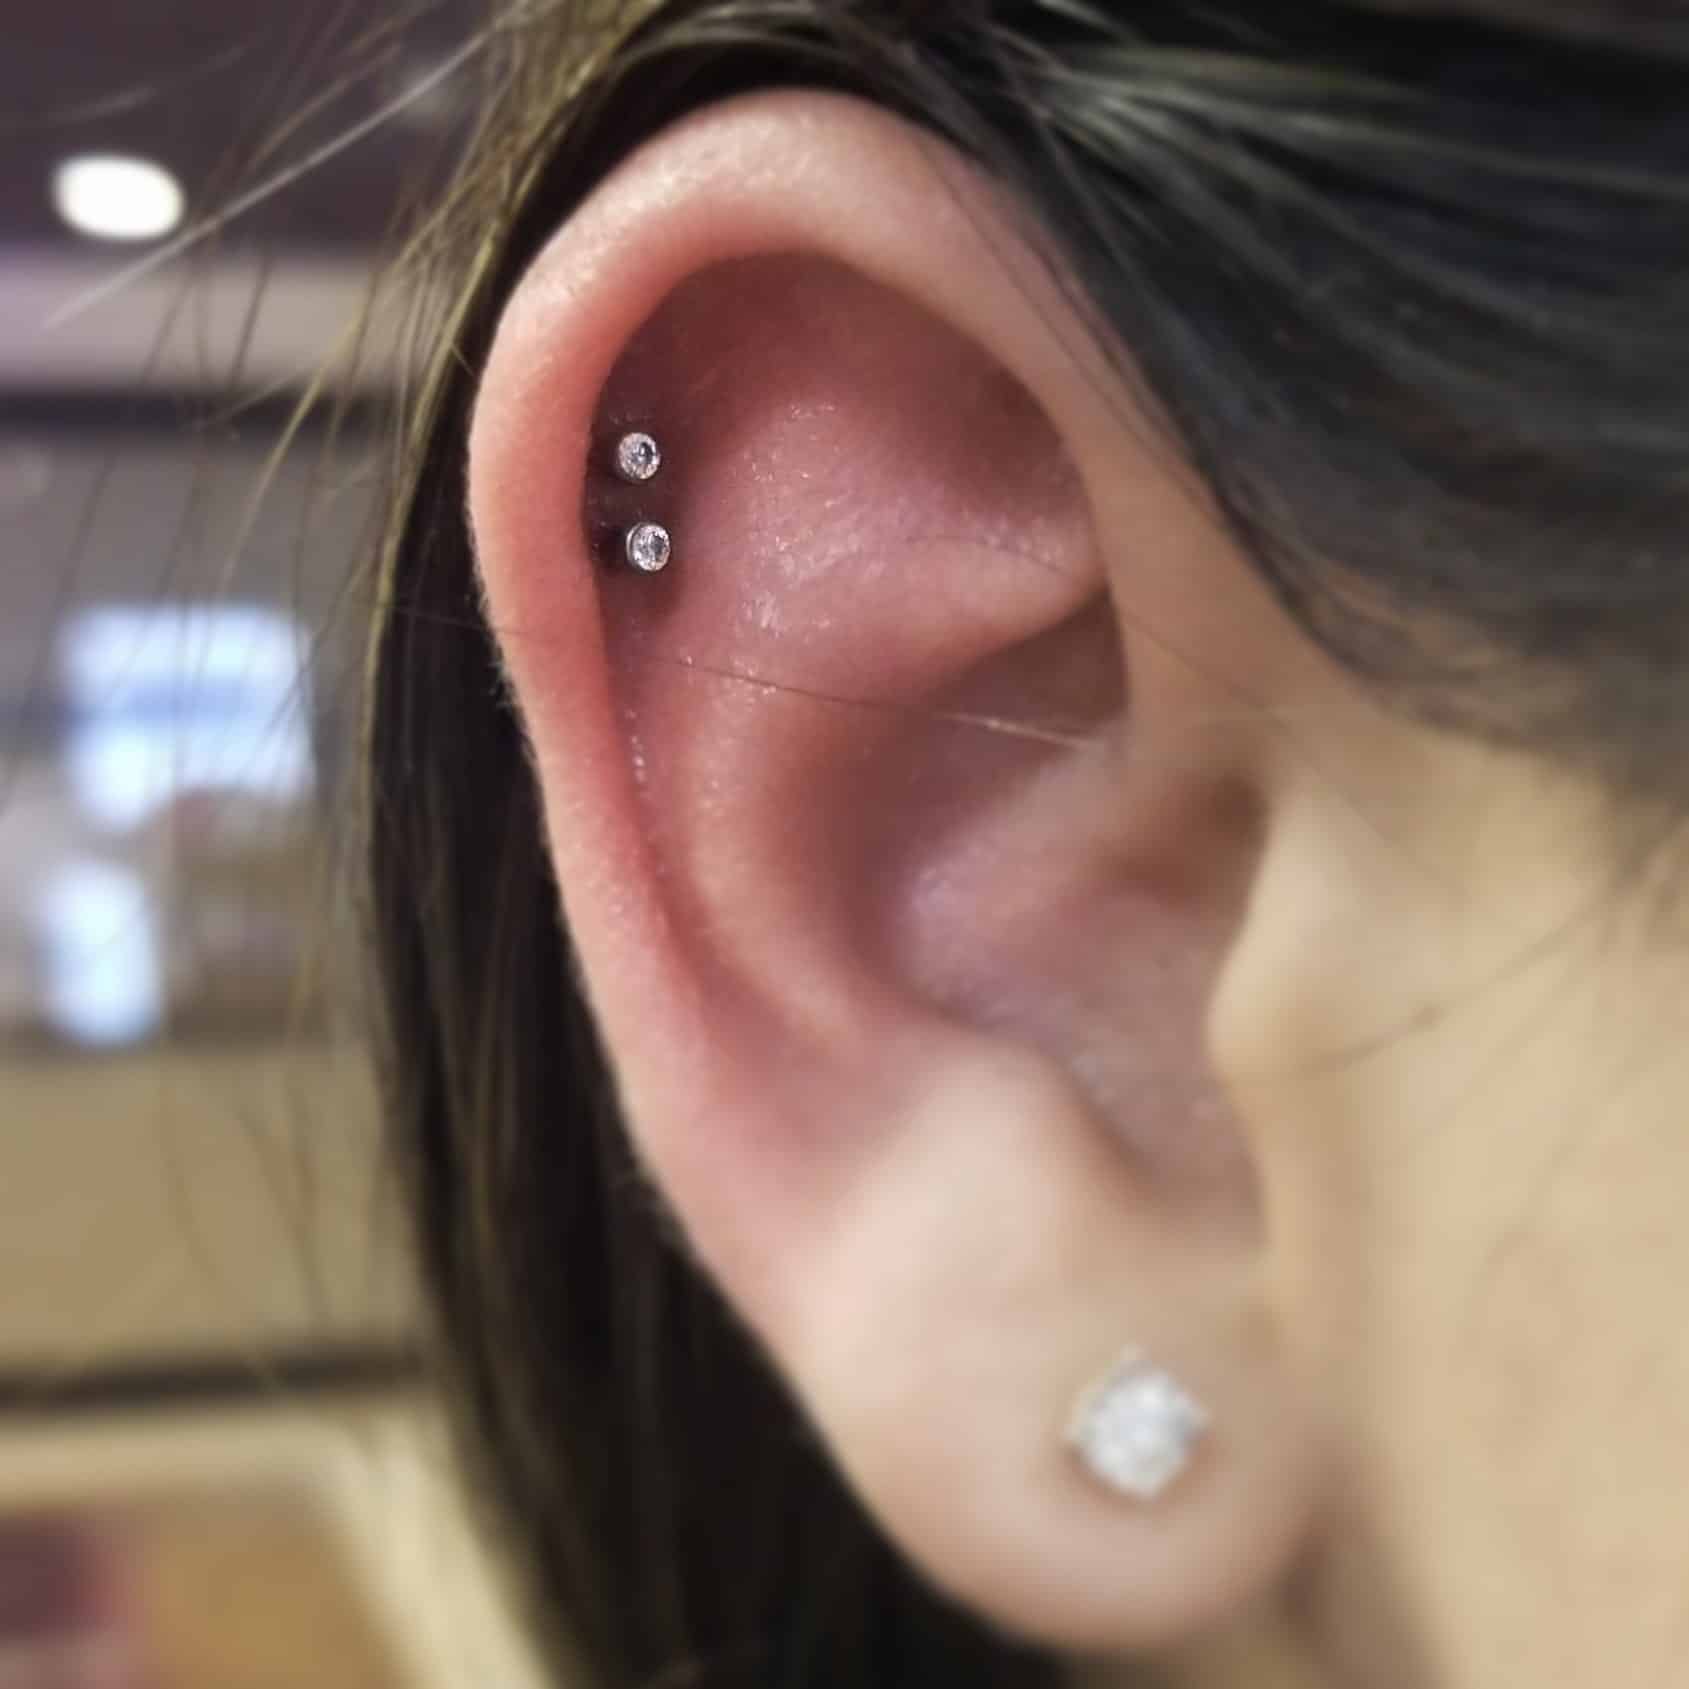 Double helix piercing, Savvy, Piercer at Revolt Tattoos in Lake Tahoe